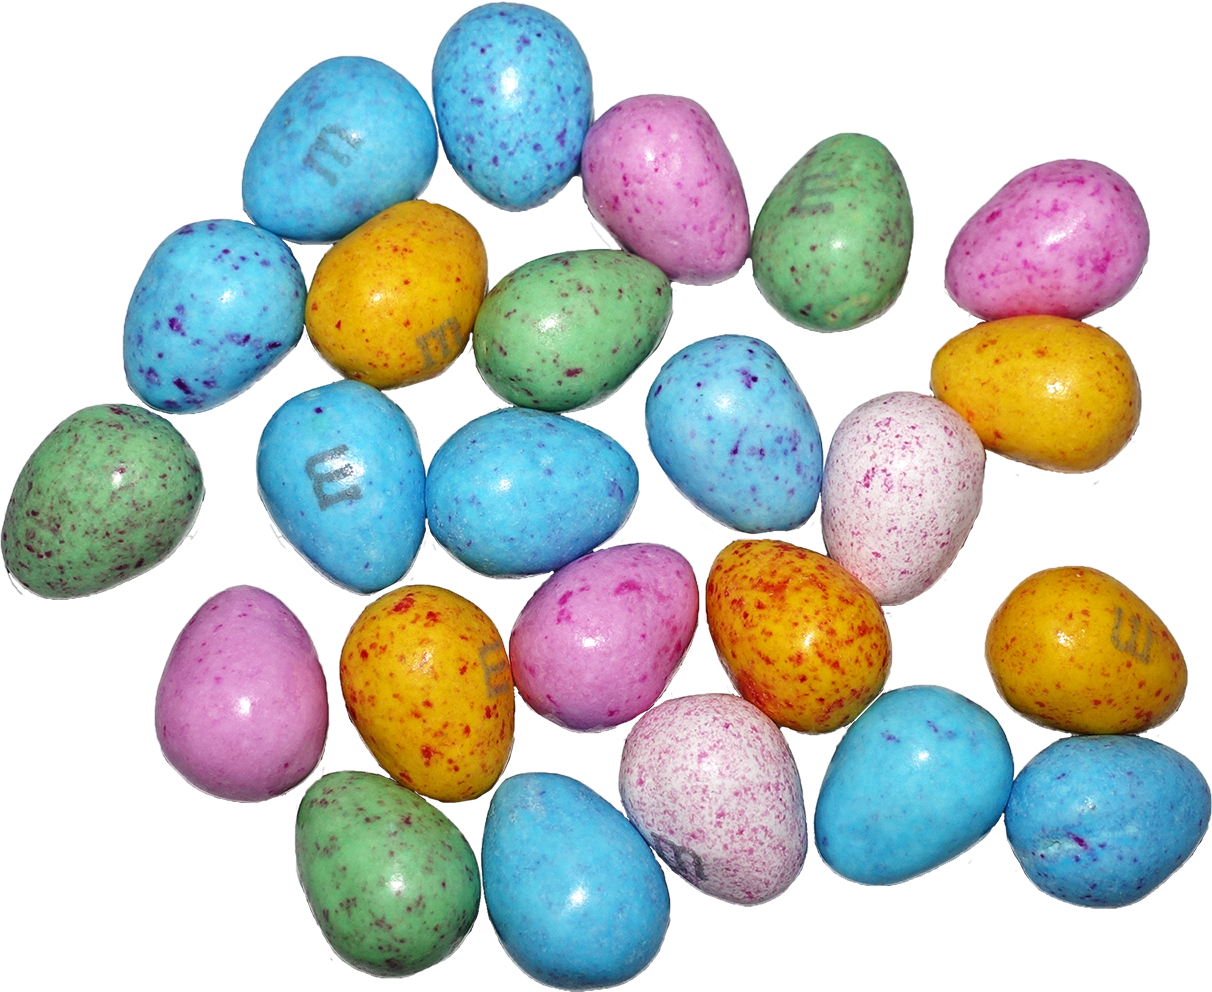 File:An egg.png - Wikimedia Commons